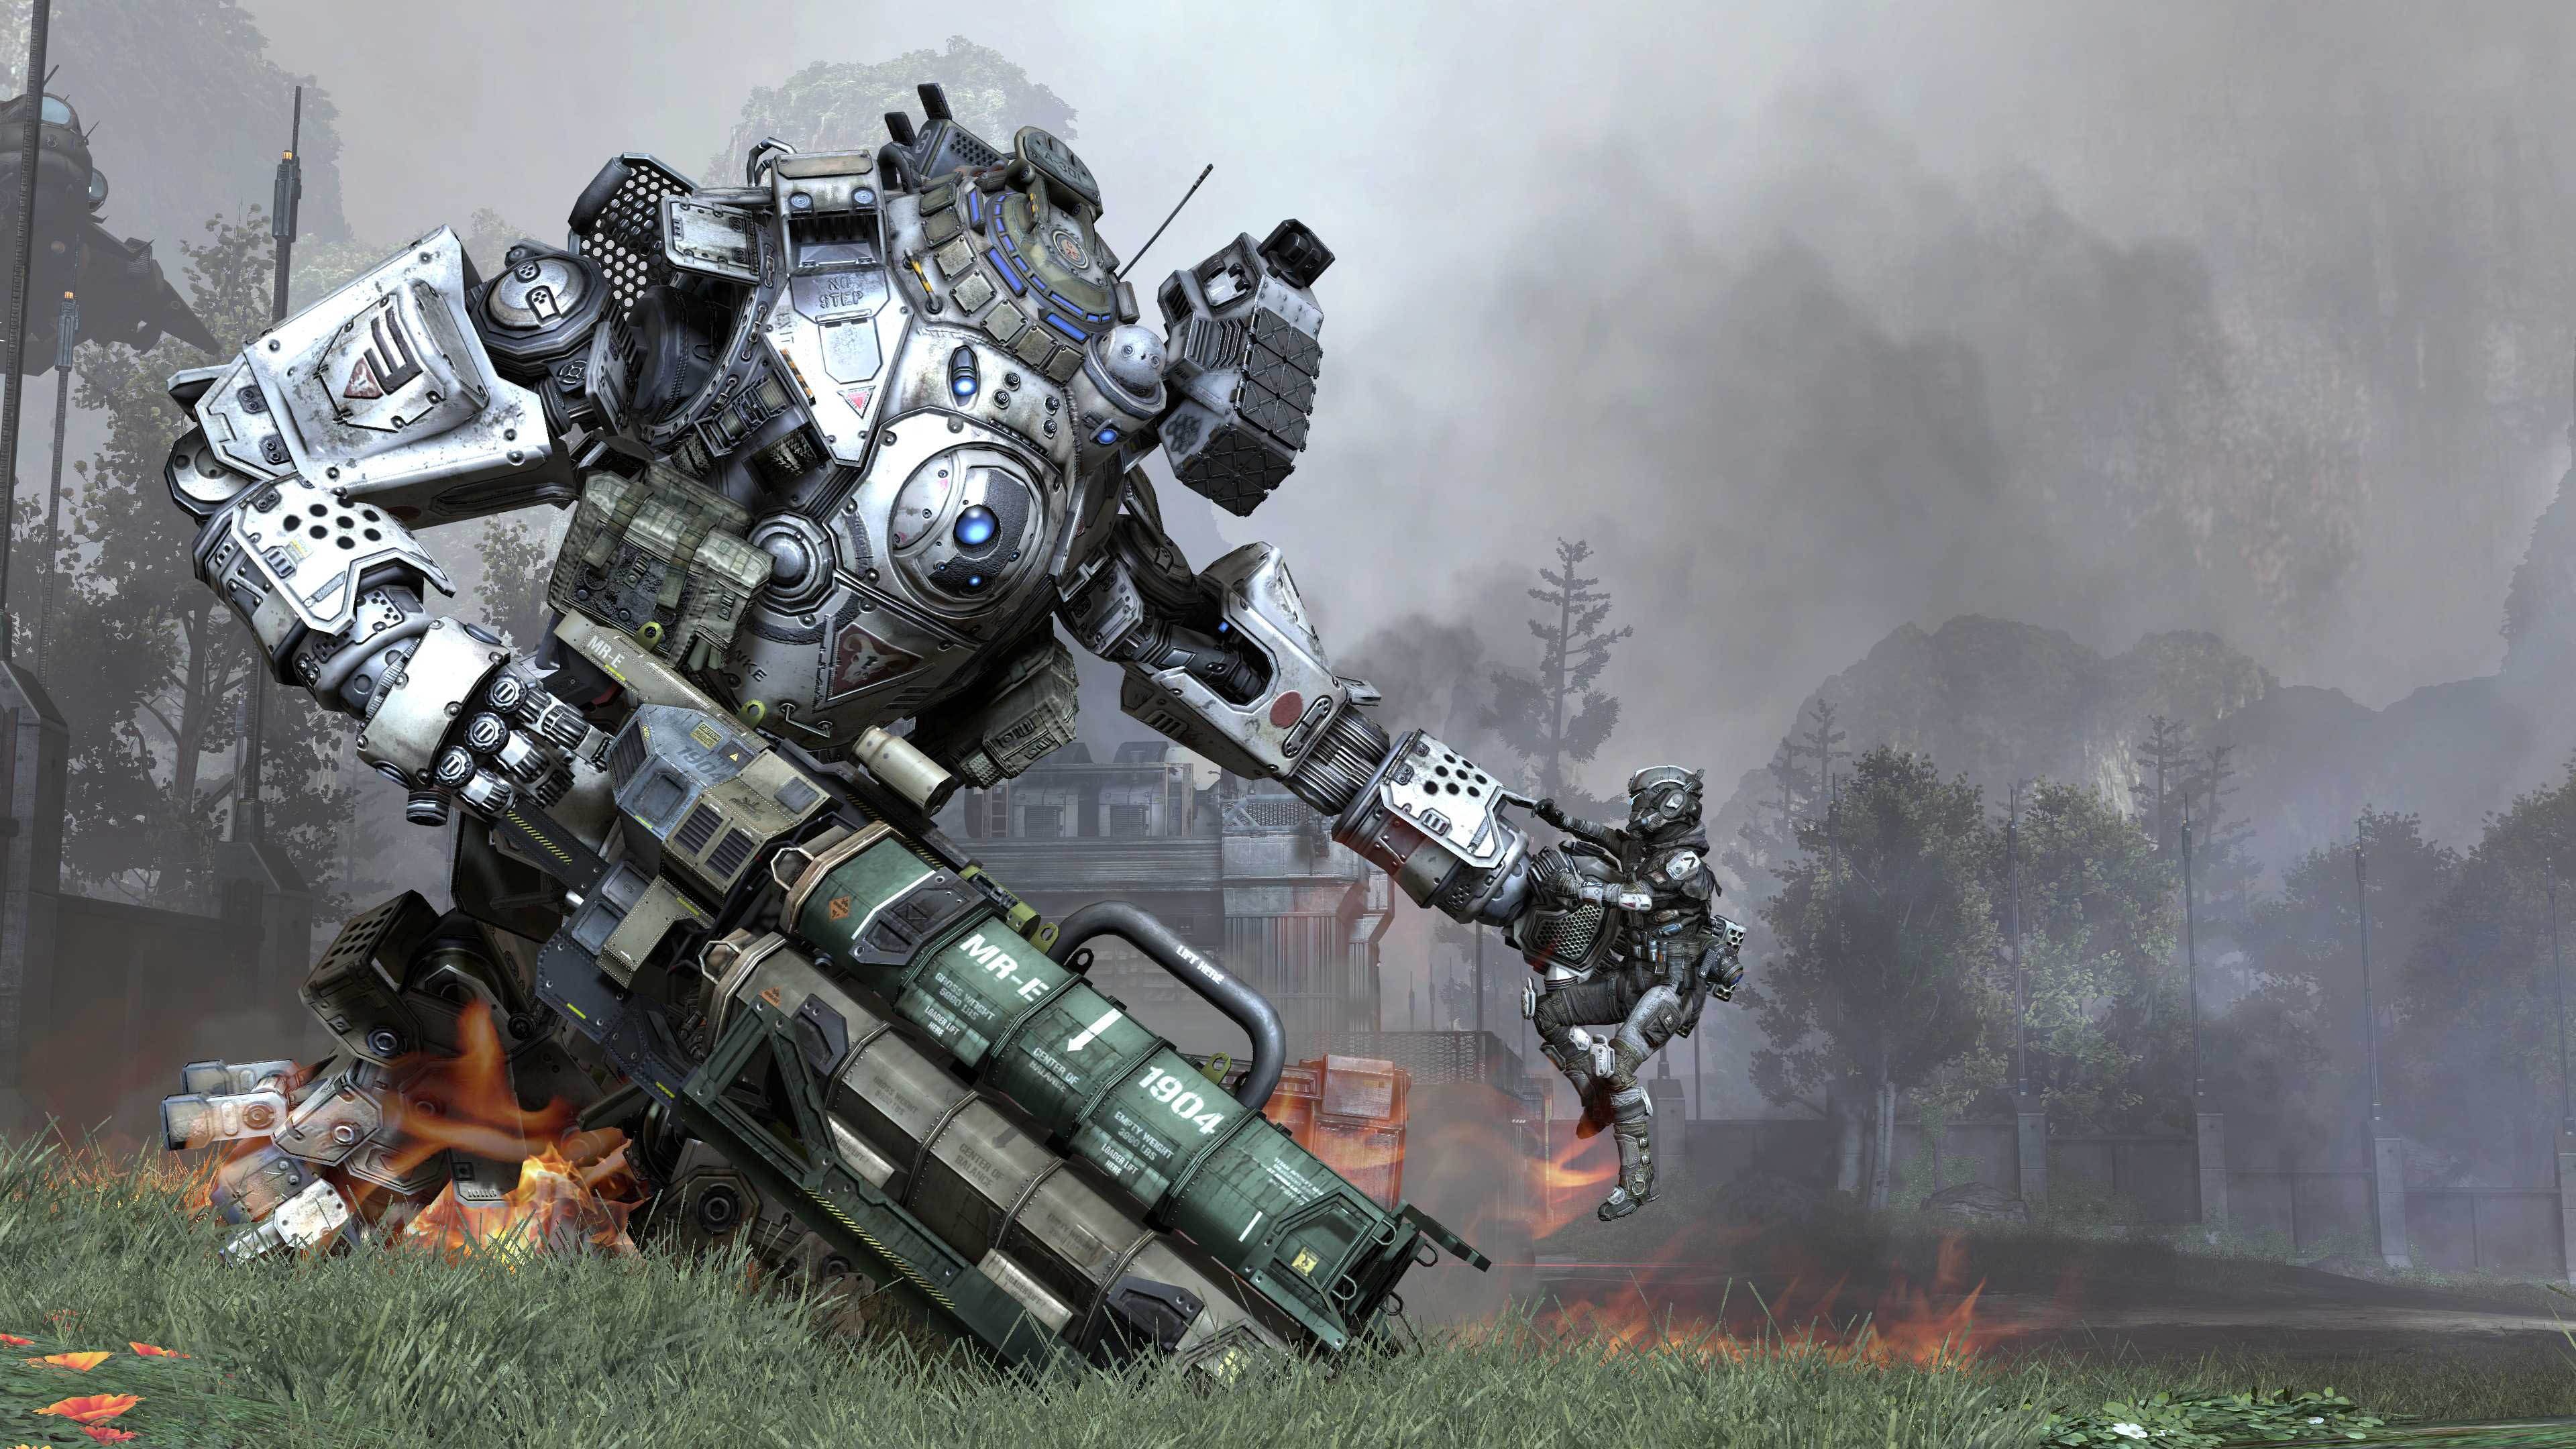 Titanfall 2's free War Games DLC is out today, and so is a new trailer